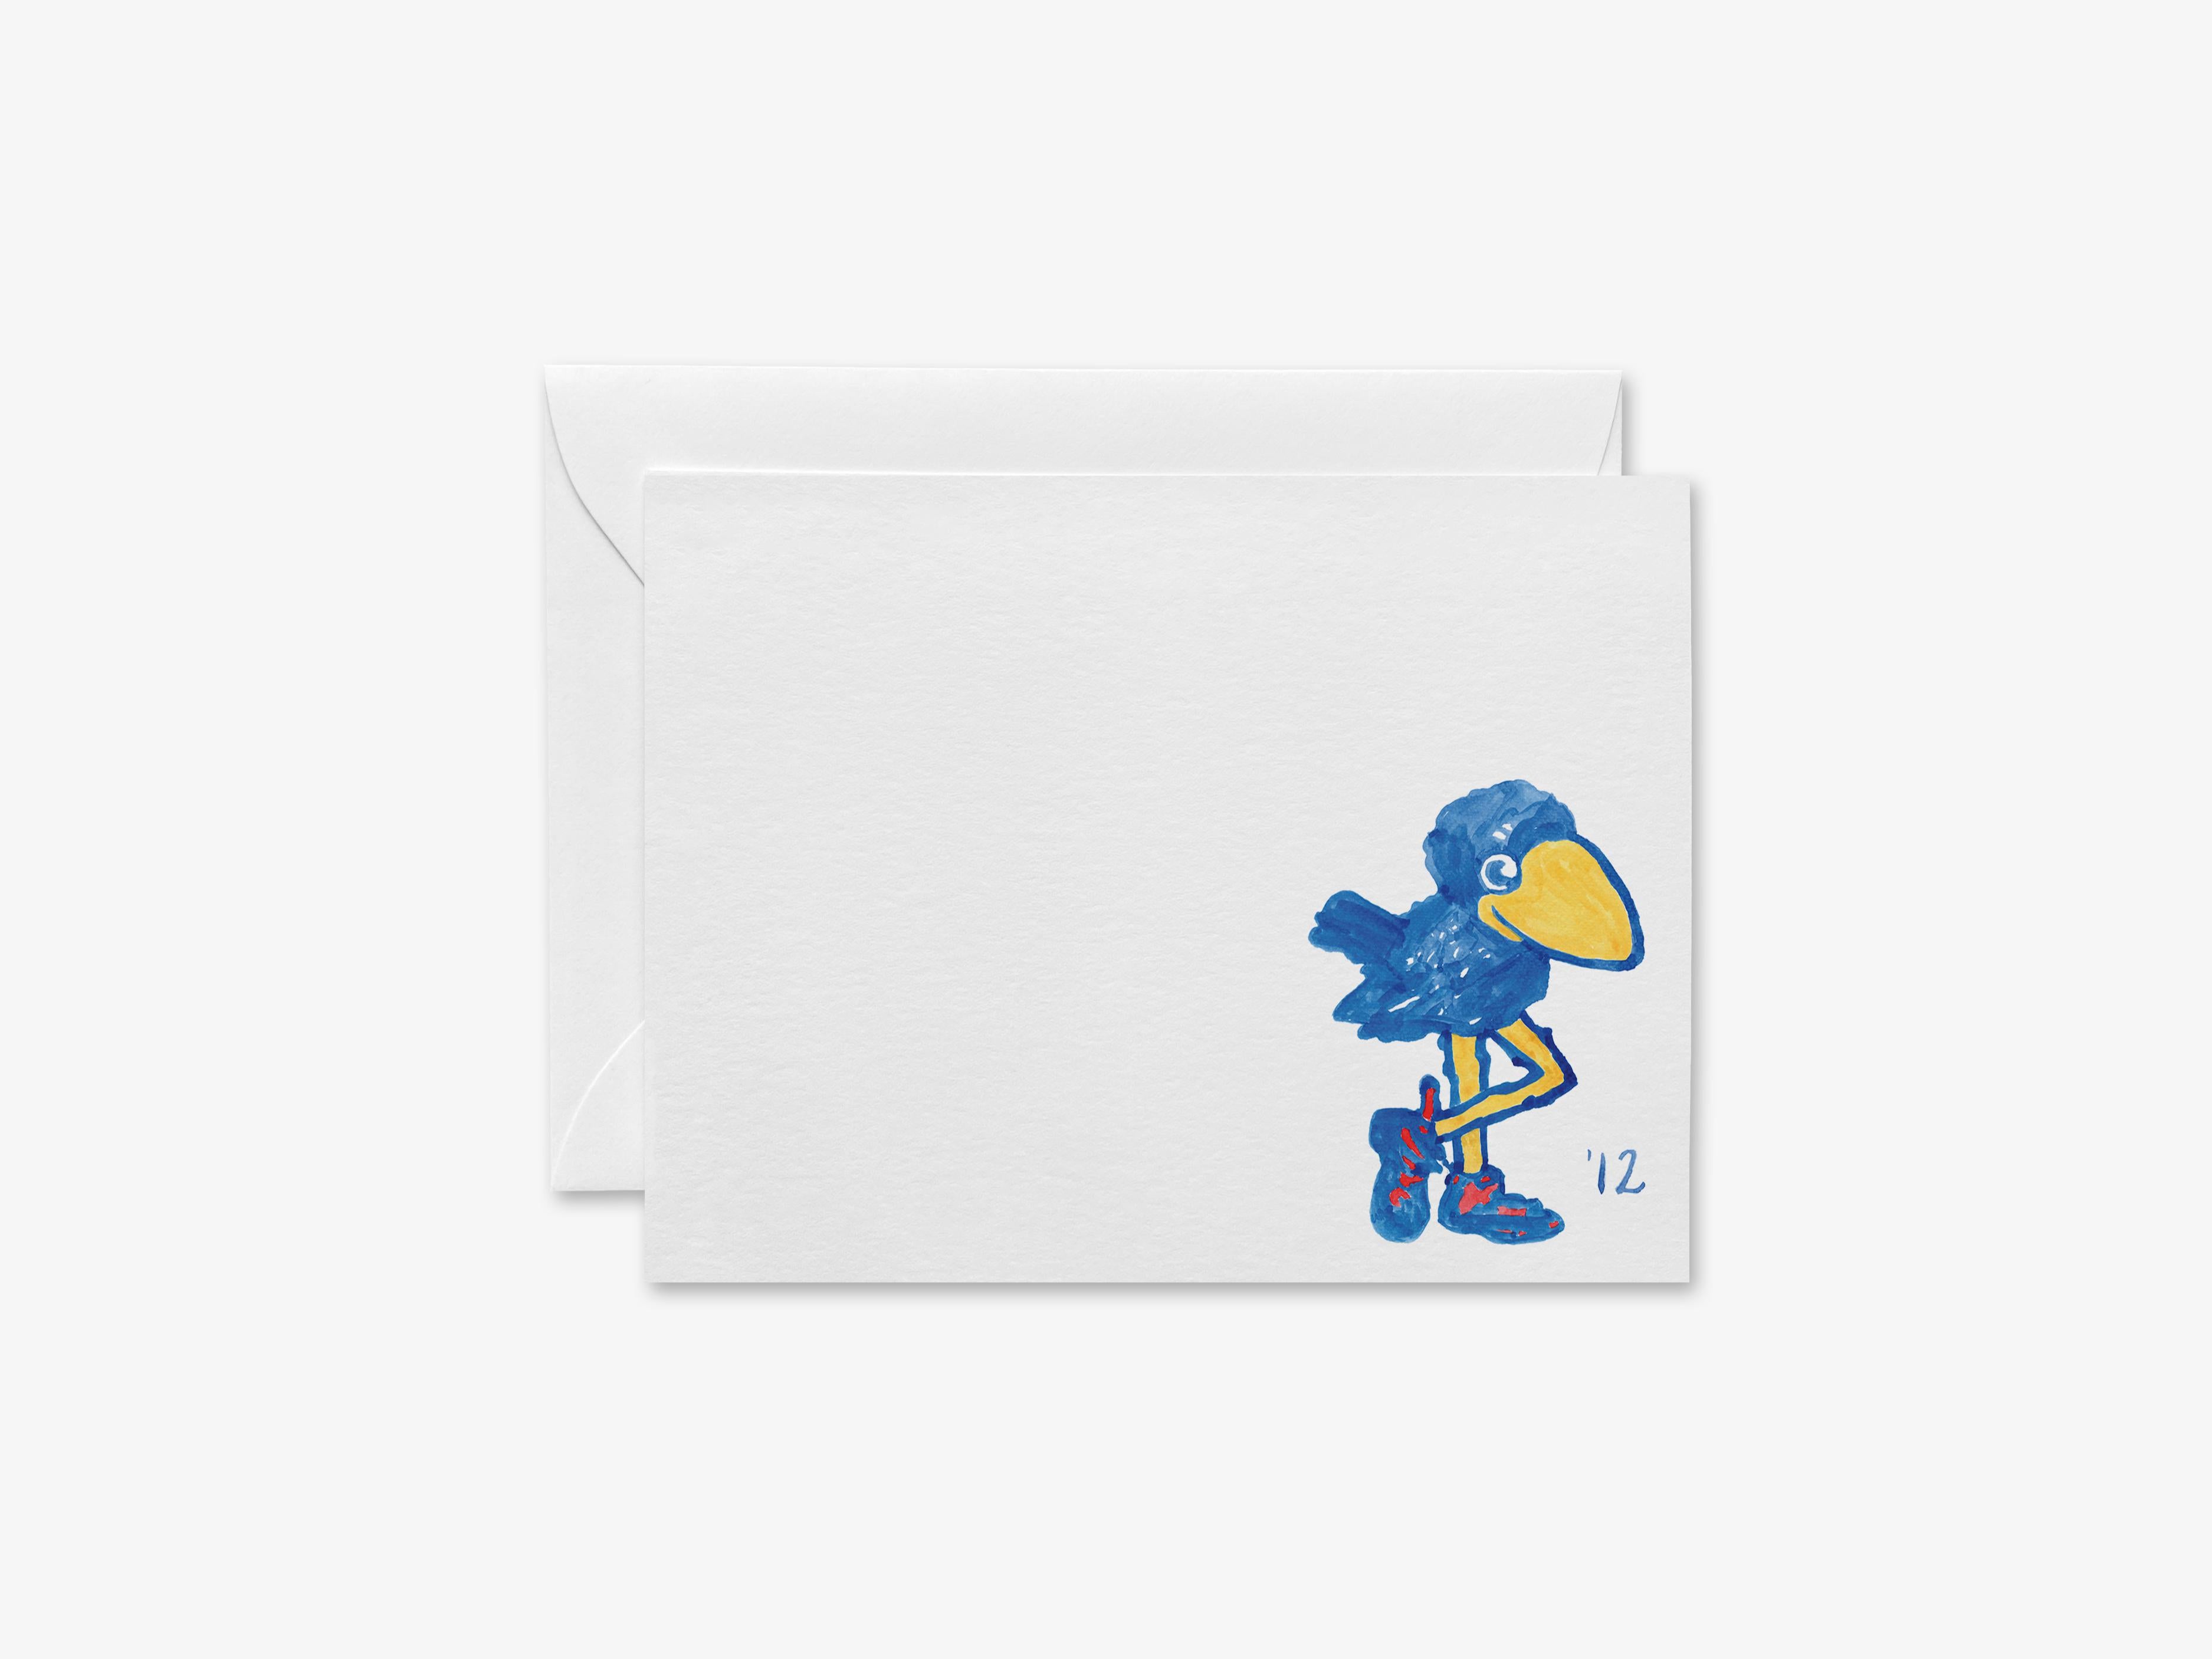 1912 Jayhawk Flat Notes - [Officially Licensed][Sets of 8]-These flat notecards are 4.25x5.5 and feature our hand-painted watercolor 1912 Kansas Jayhawk, printed in the USA on 120lb textured stock. They come with white envelopes and make great thank yous and gifts for the University of Kansas lover in your life.-The Singing Little Bird